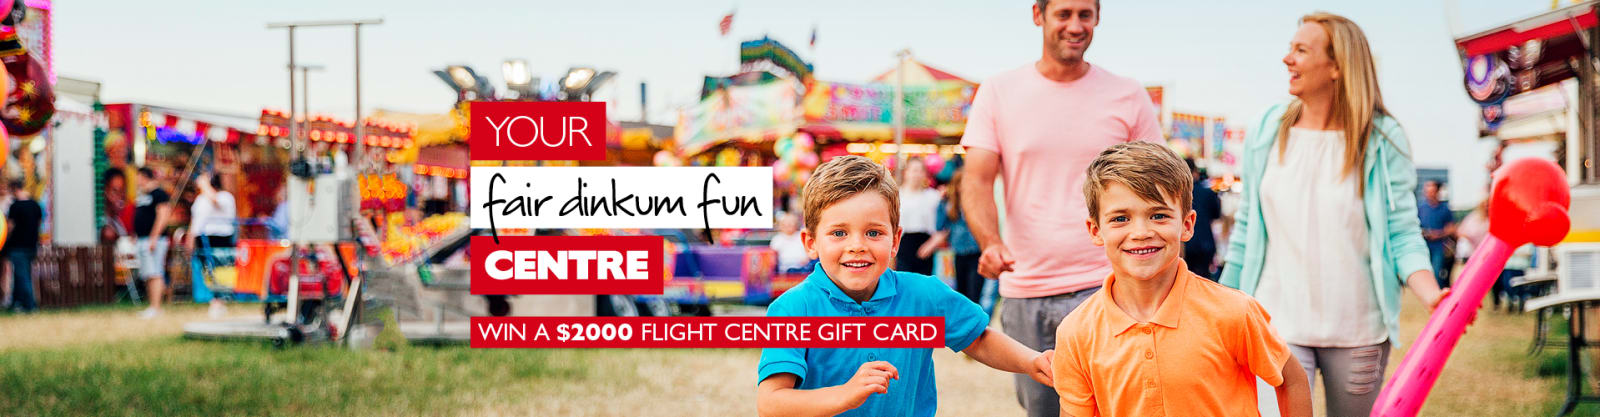 Your Fair Dinkum fun centre - win a $2,000 flight centre gift card - two kids playing at the Perth Royal Show